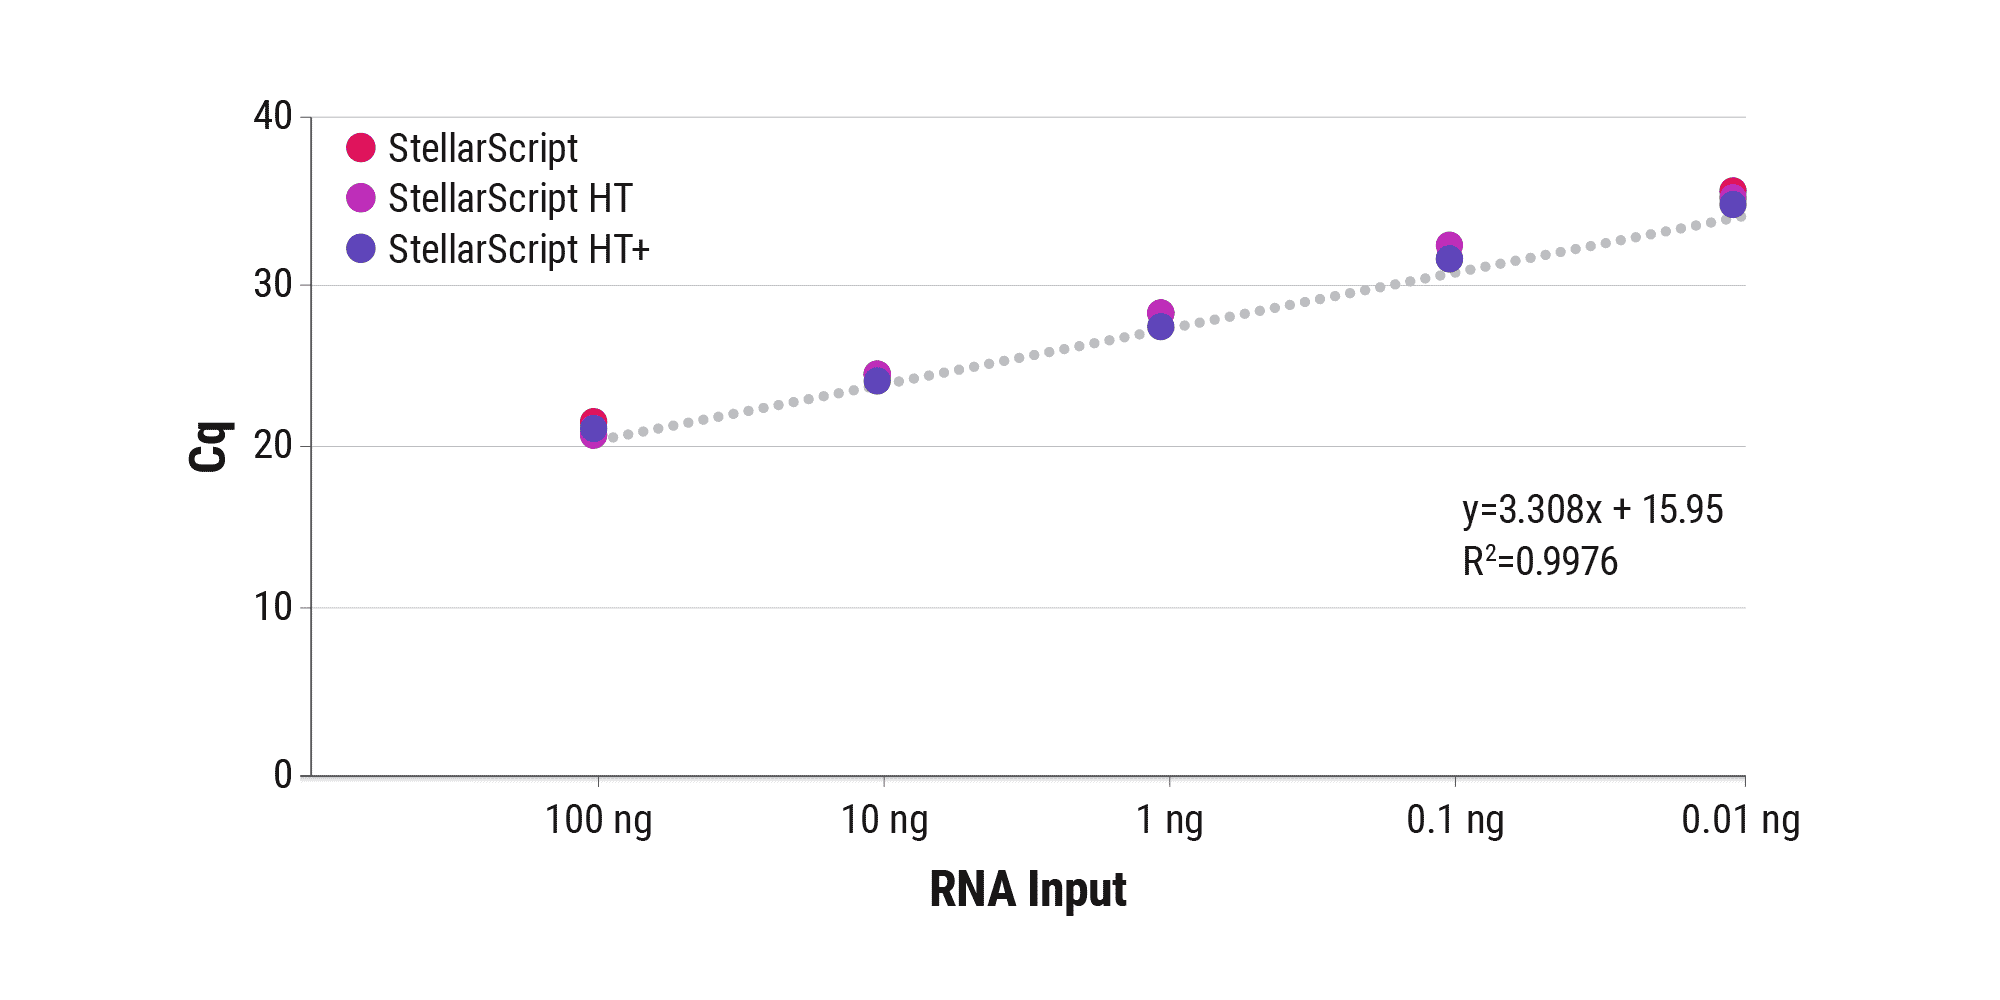 Figure 2A. Generate cDNA from low-input and degraded RNA samples. StellarScript, StellarScript HT, and StellarScript HT+ were run in oligo-dT and randomly primed first strand synthesis at 42°C (StellarScript) or 50°C (HT and HT+) for 40 minutes using 100 ng to 0.01 ng total liver RNA as template. Resulting cDNA yields were assessed via qPCR. All enzymes show similar sensitivity when reverse transcription is employed in their optimal temperature range.